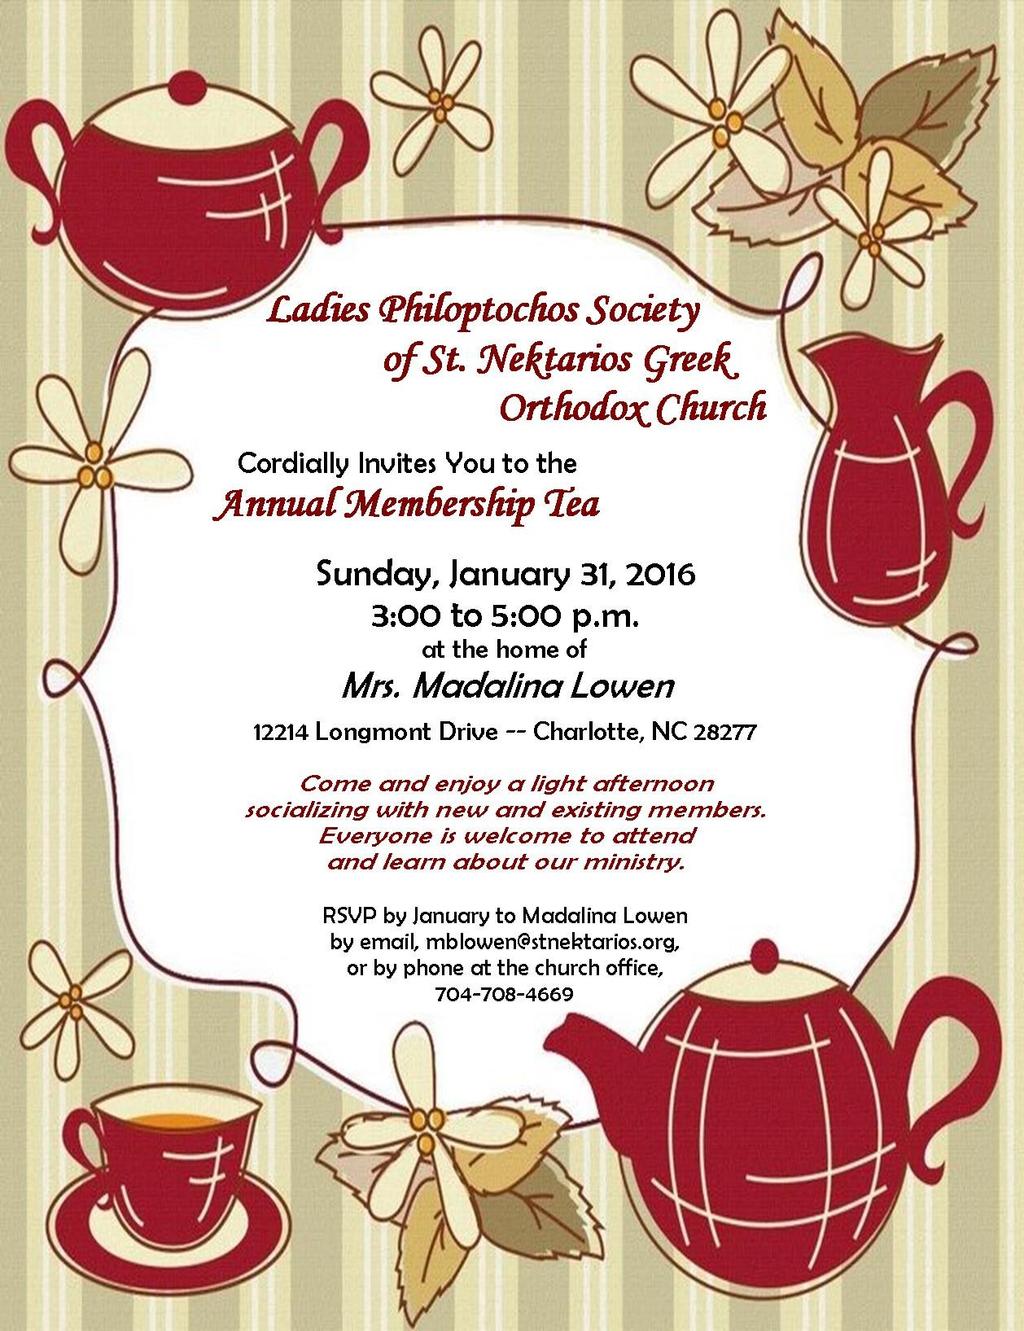 ) Sunday, January 31 Membership Tea see flyer for details Thursday, February 18 or 25 (tent) Health Fair details to follow Saturday, March 26 Lenten Service